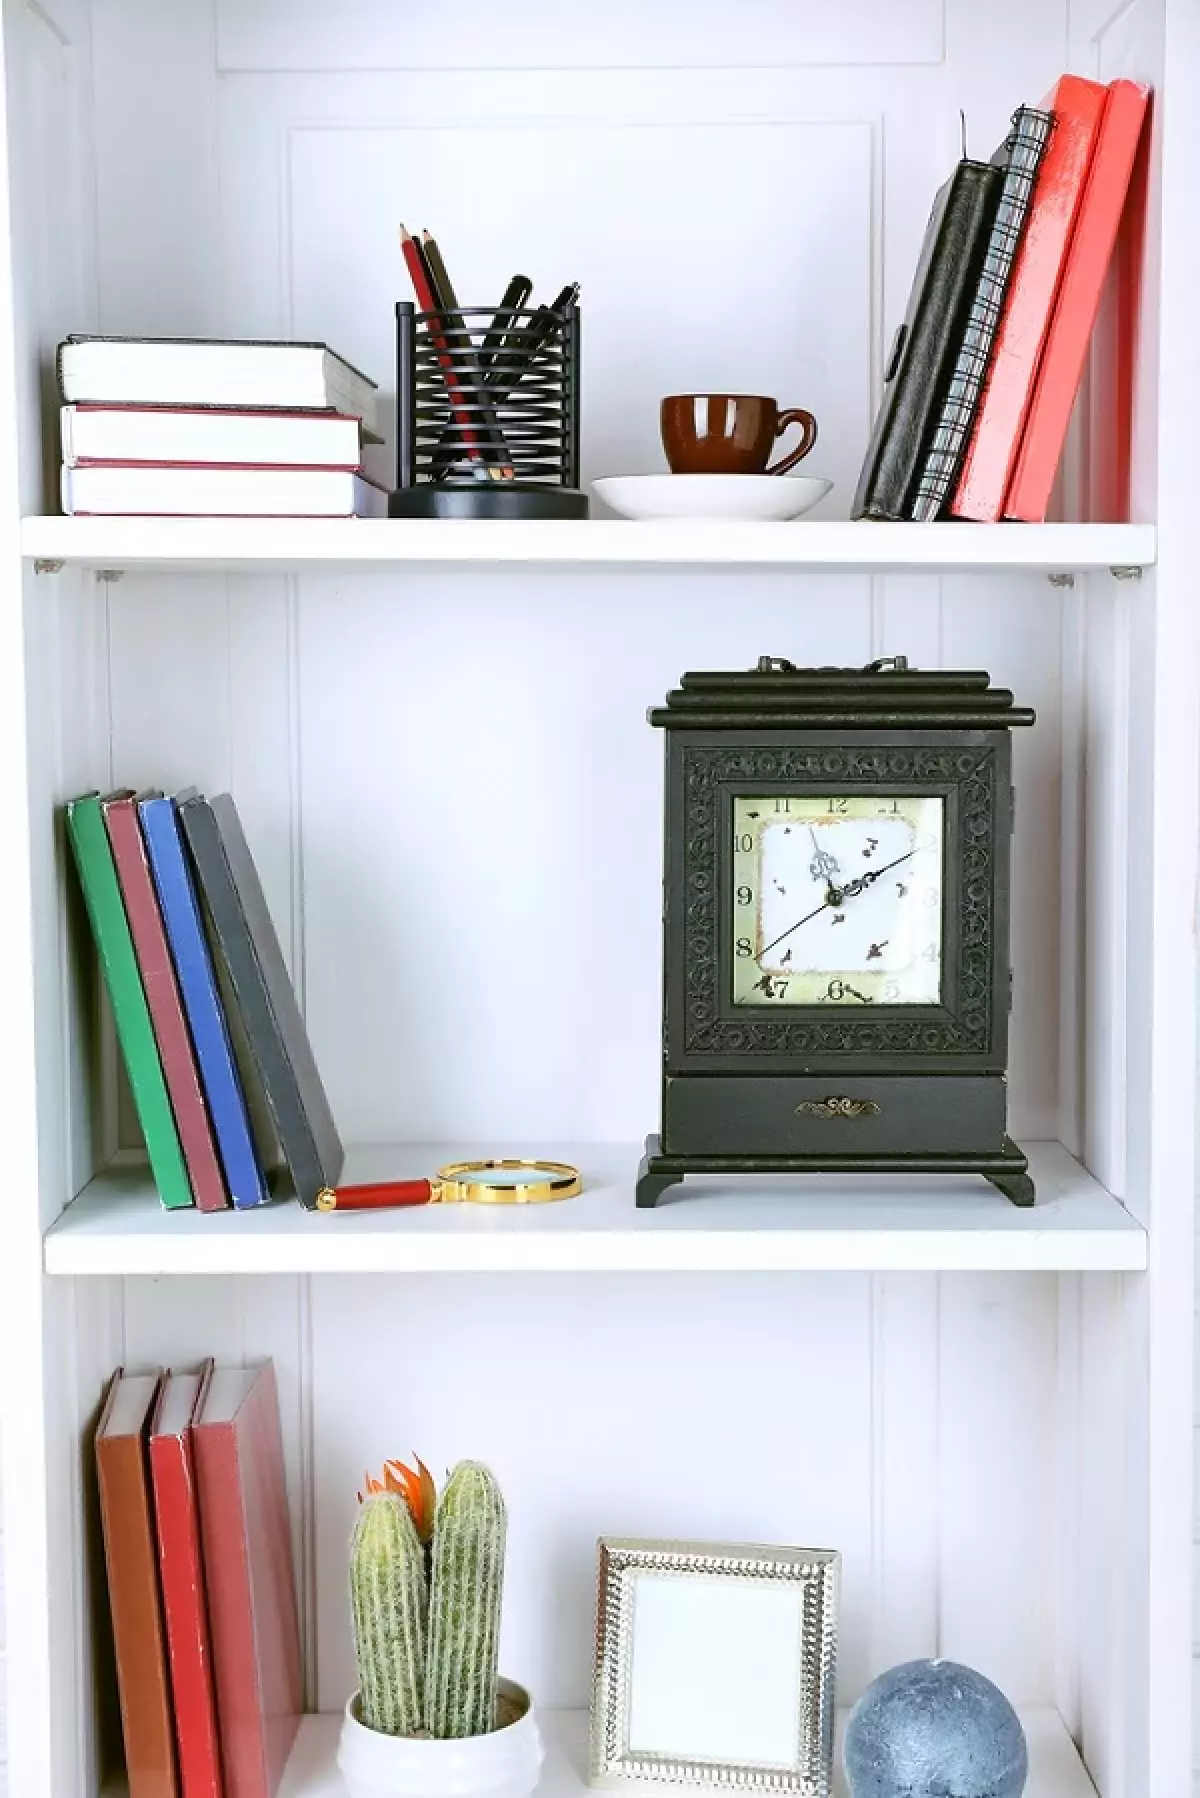 how to style a bookcase